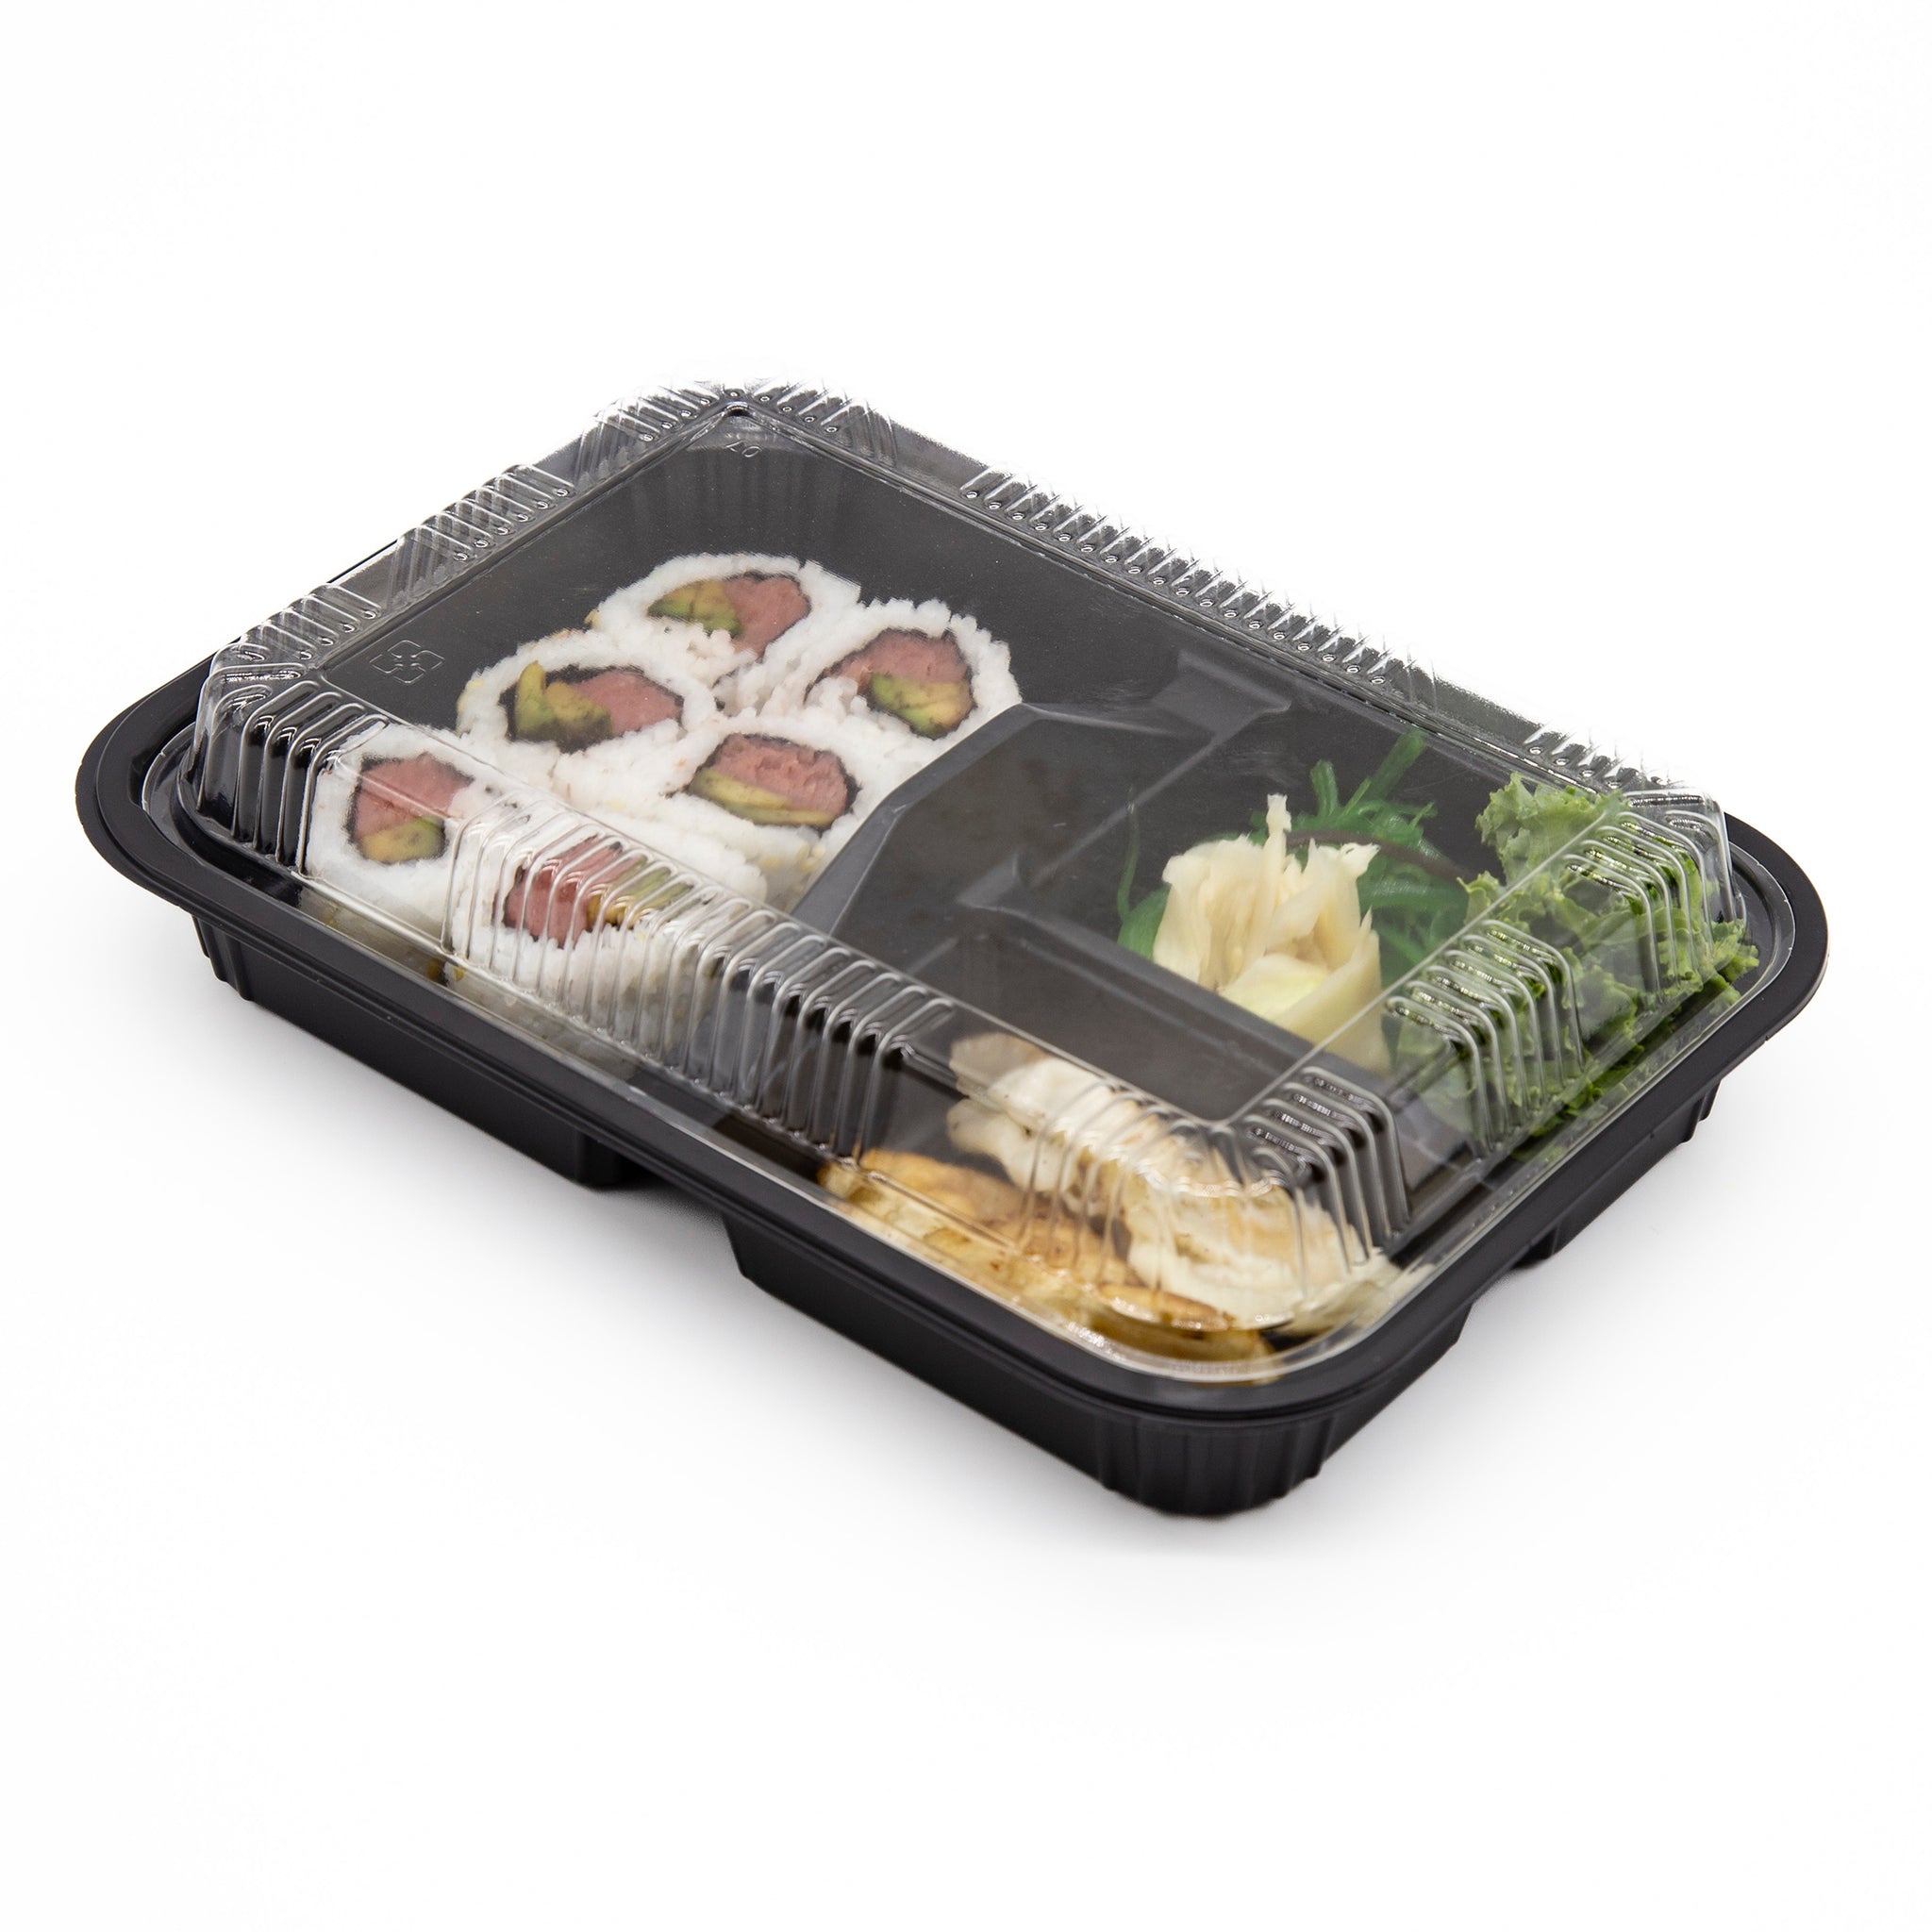 1 compartment, 3 Compartments, 4 Compartment, 5 Compartment bento box –  WhatsApp us at 8923 7833 for more details